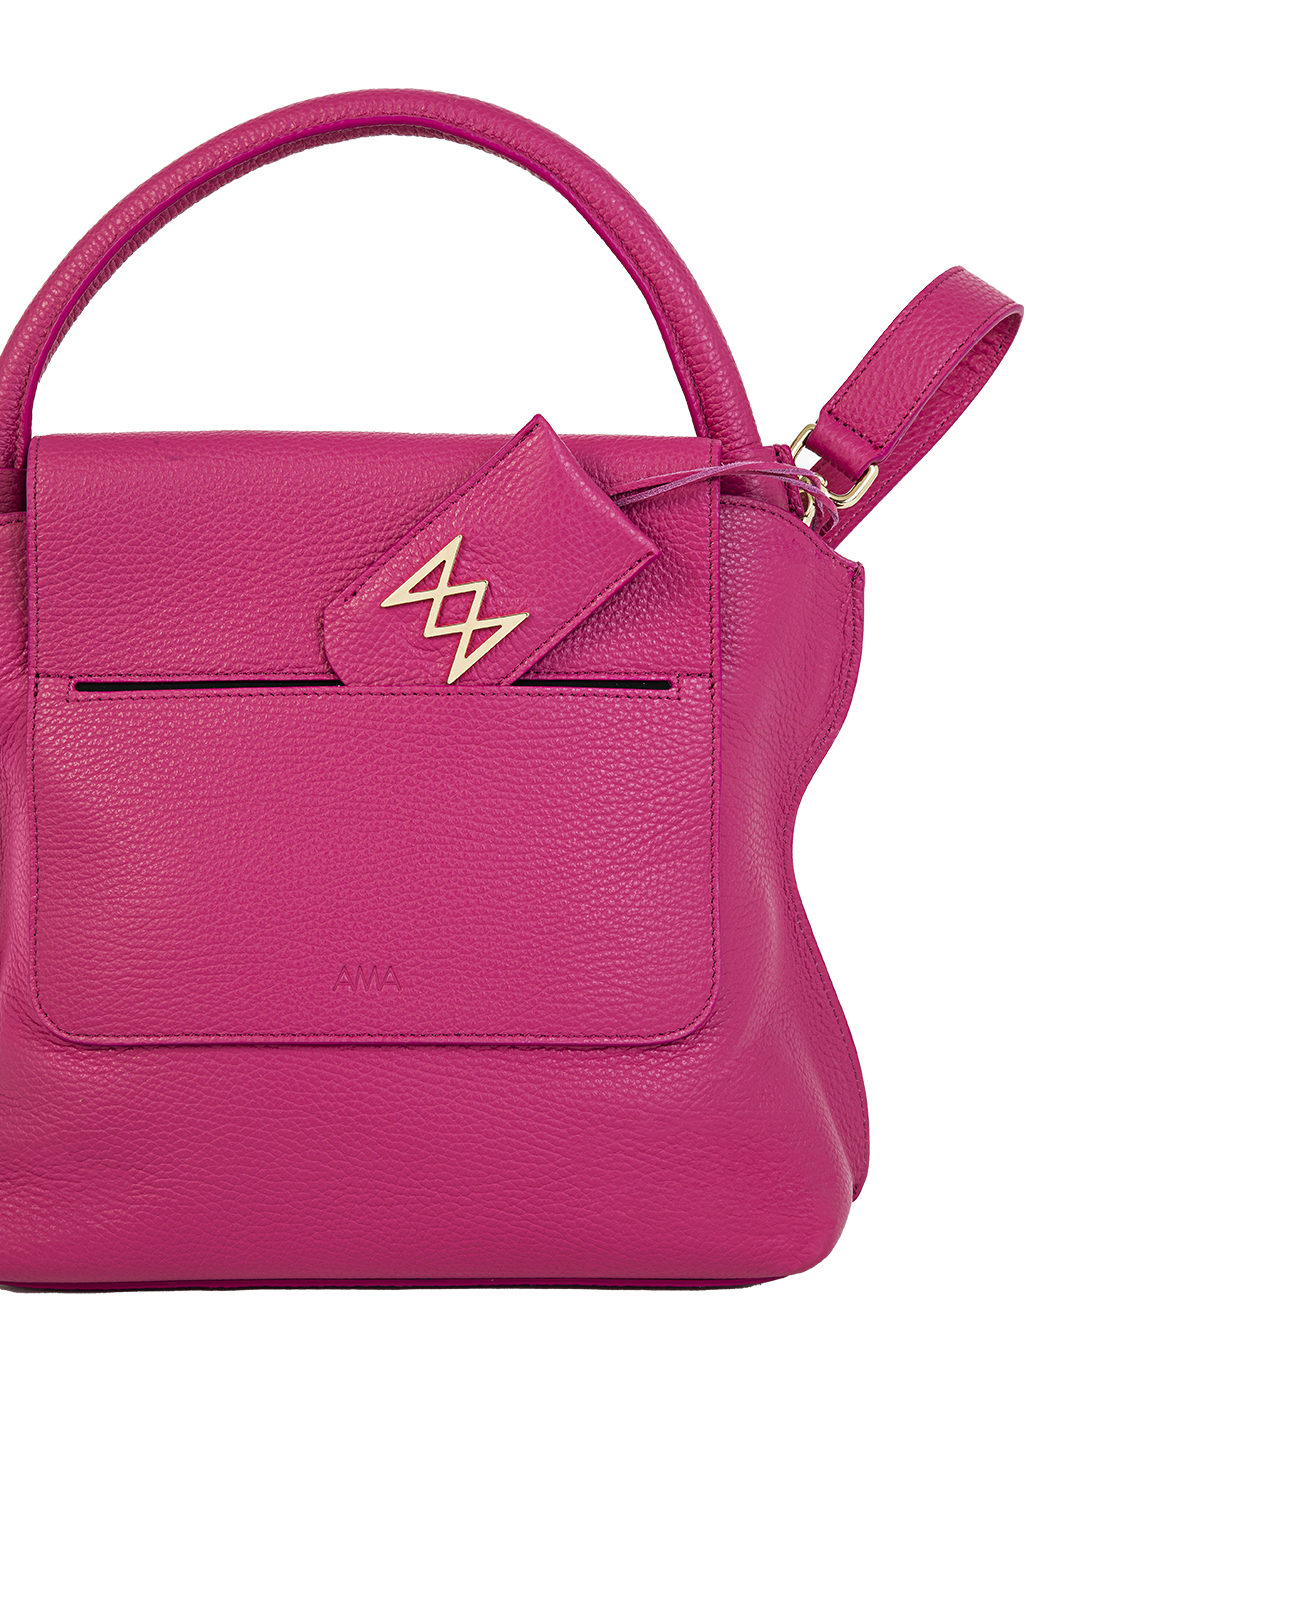 Cross-body bag in Italian full-grain leather, semi-aniline calf Italian leather with detachable shoulder strap.Three compartments, zip pocket in the back compartment. Magnetic flap closure with logo. Color: Pink. Size:Large